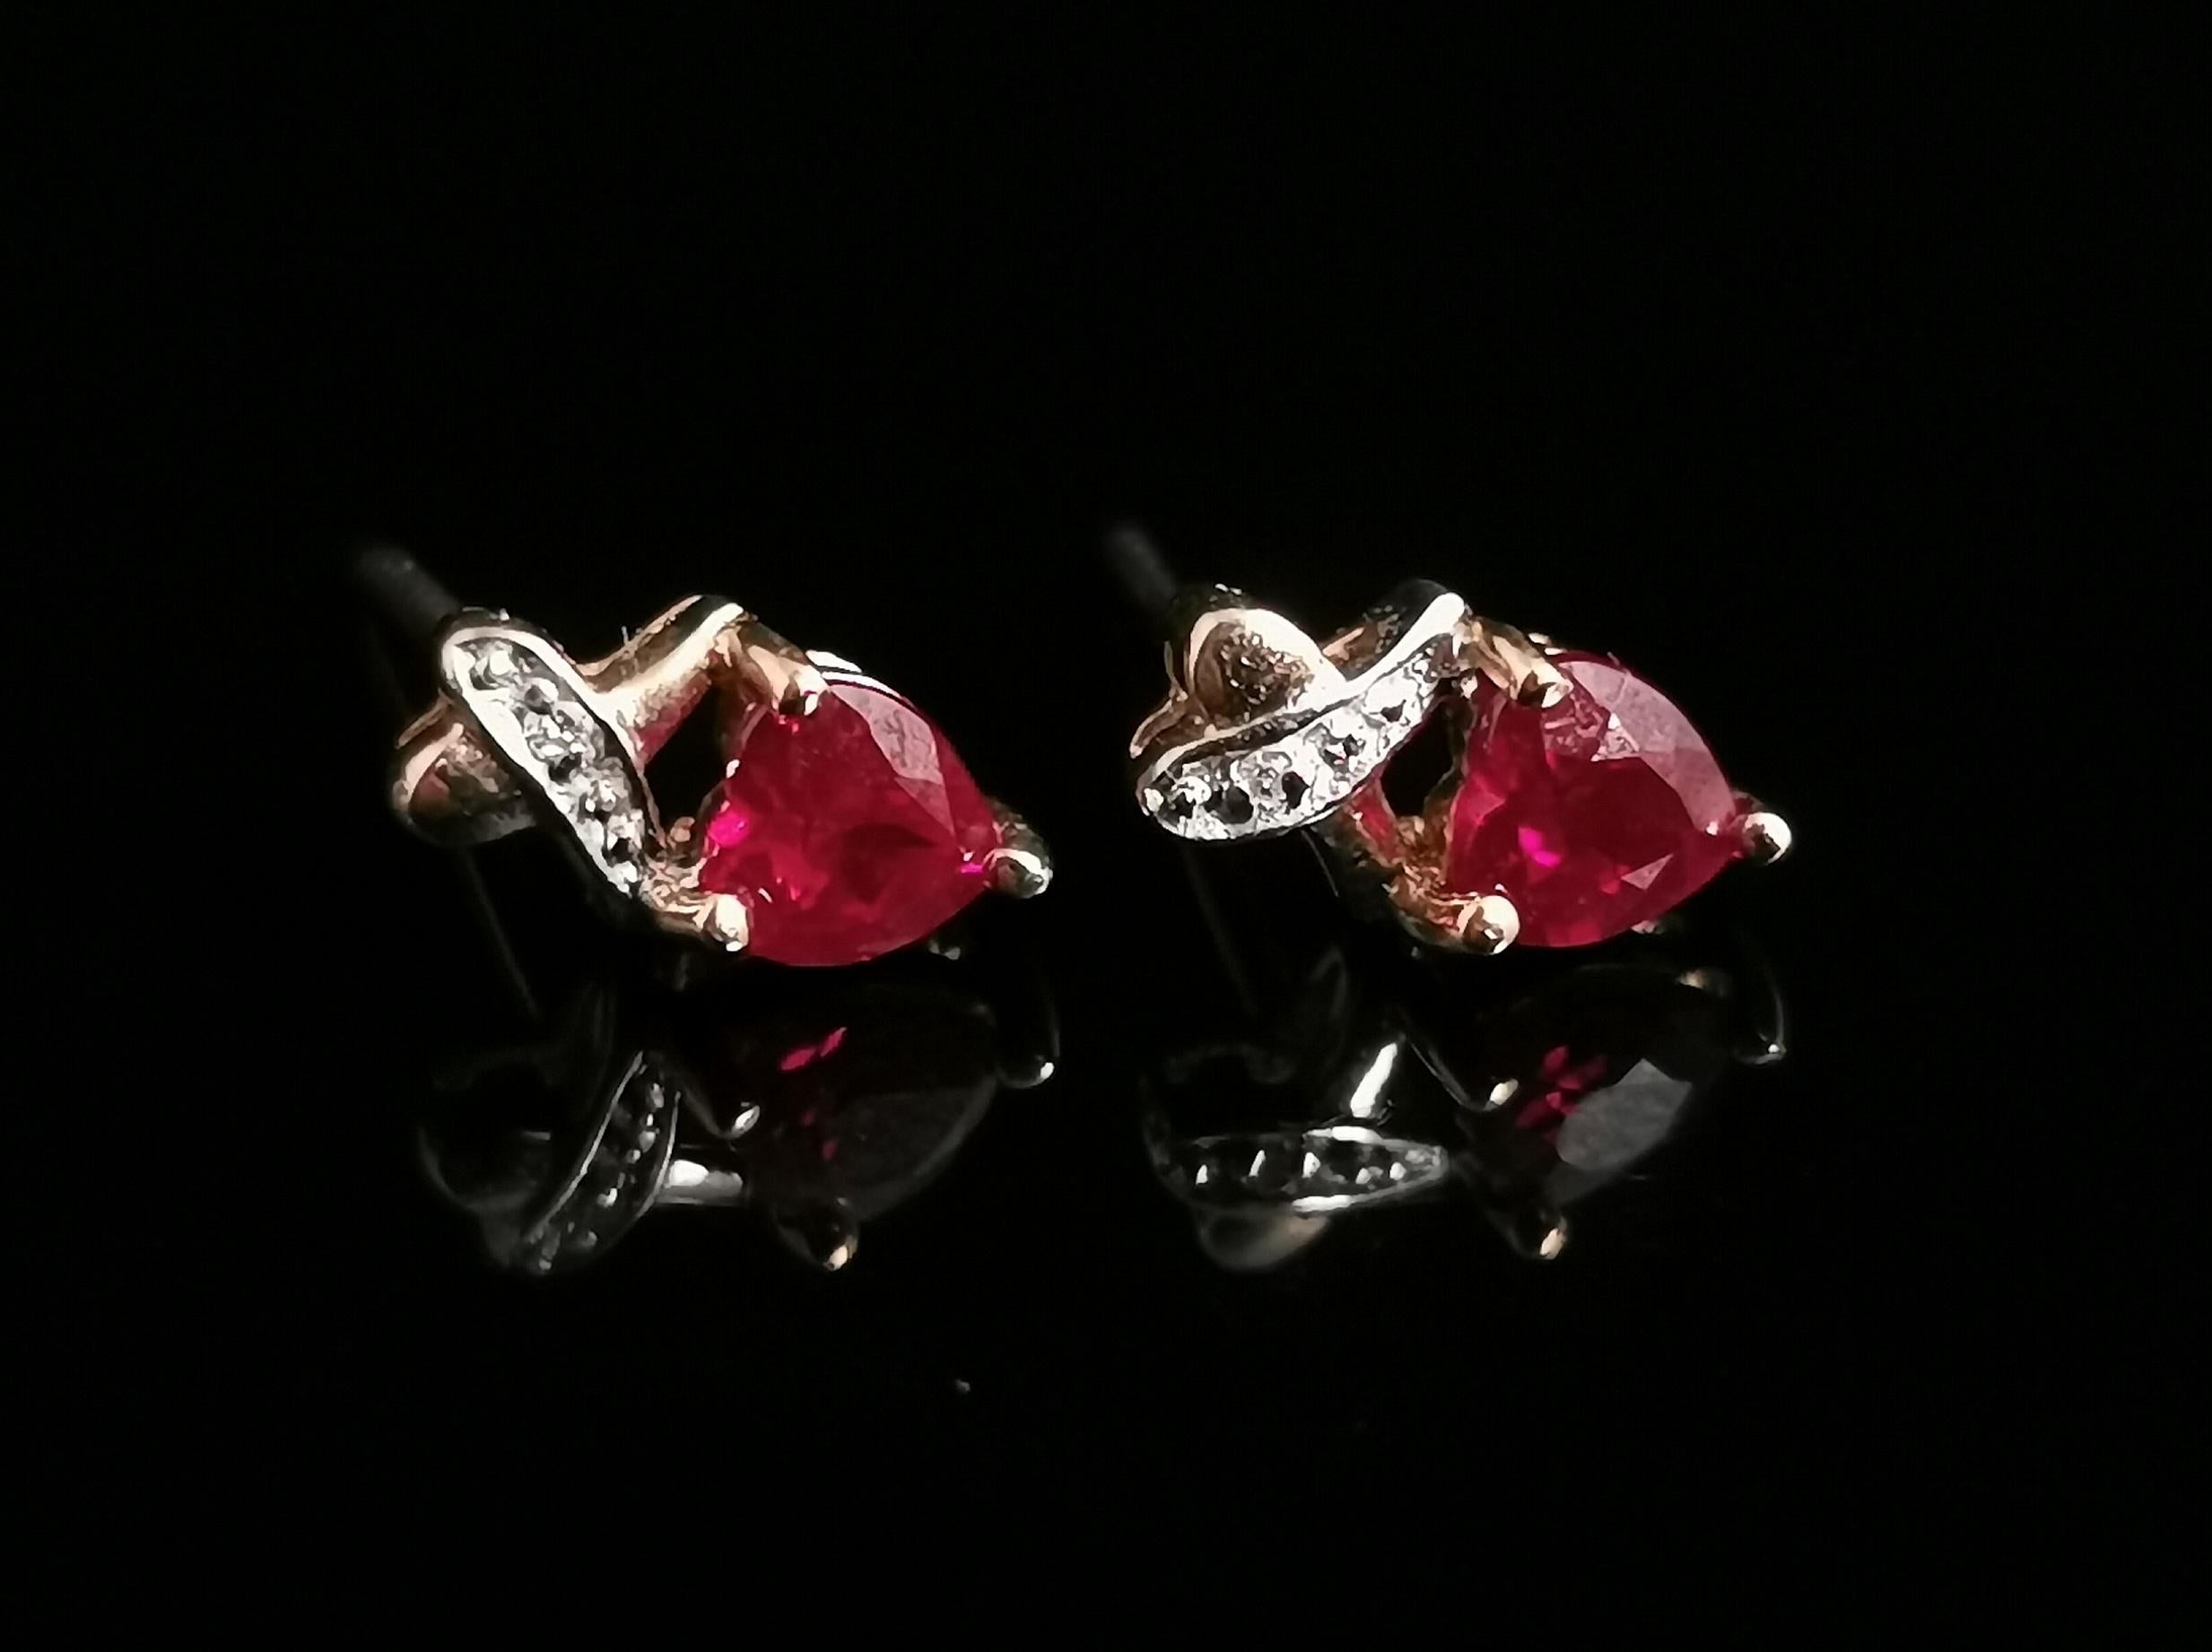 A pretty pair of vintage Synthetic Ruby and Diamond heart shaped stud earrings in 9kt yellow and white gold.

The rubies have a deep red pink hue and are cut in a heart shape, above each Ruby is a scroll of white gold set with tiny diamond